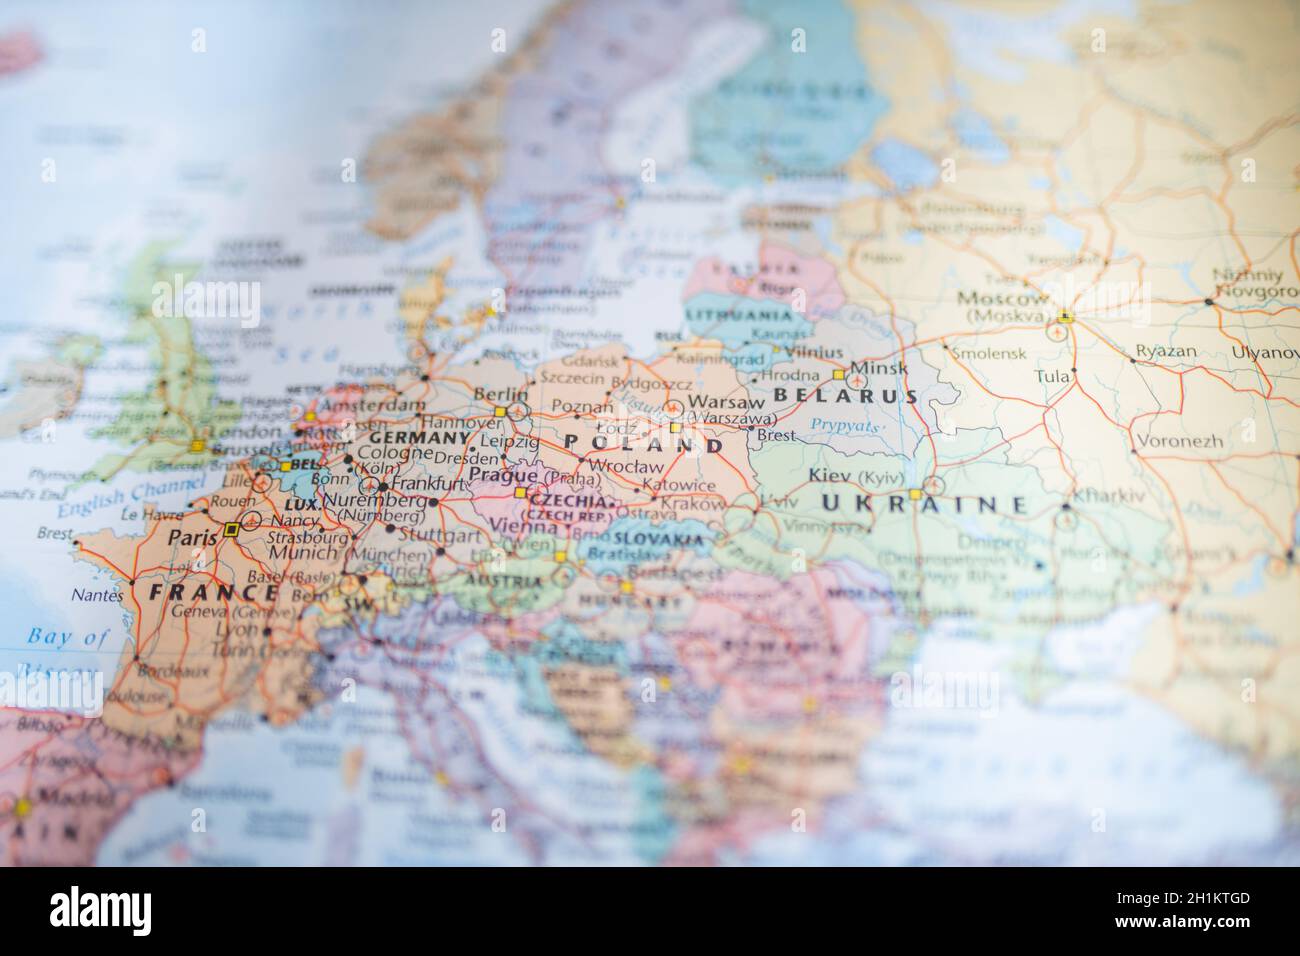 Picture of Poland, Belarus, Ukraine, Germany and France on a Blurry European Map Stock Photo